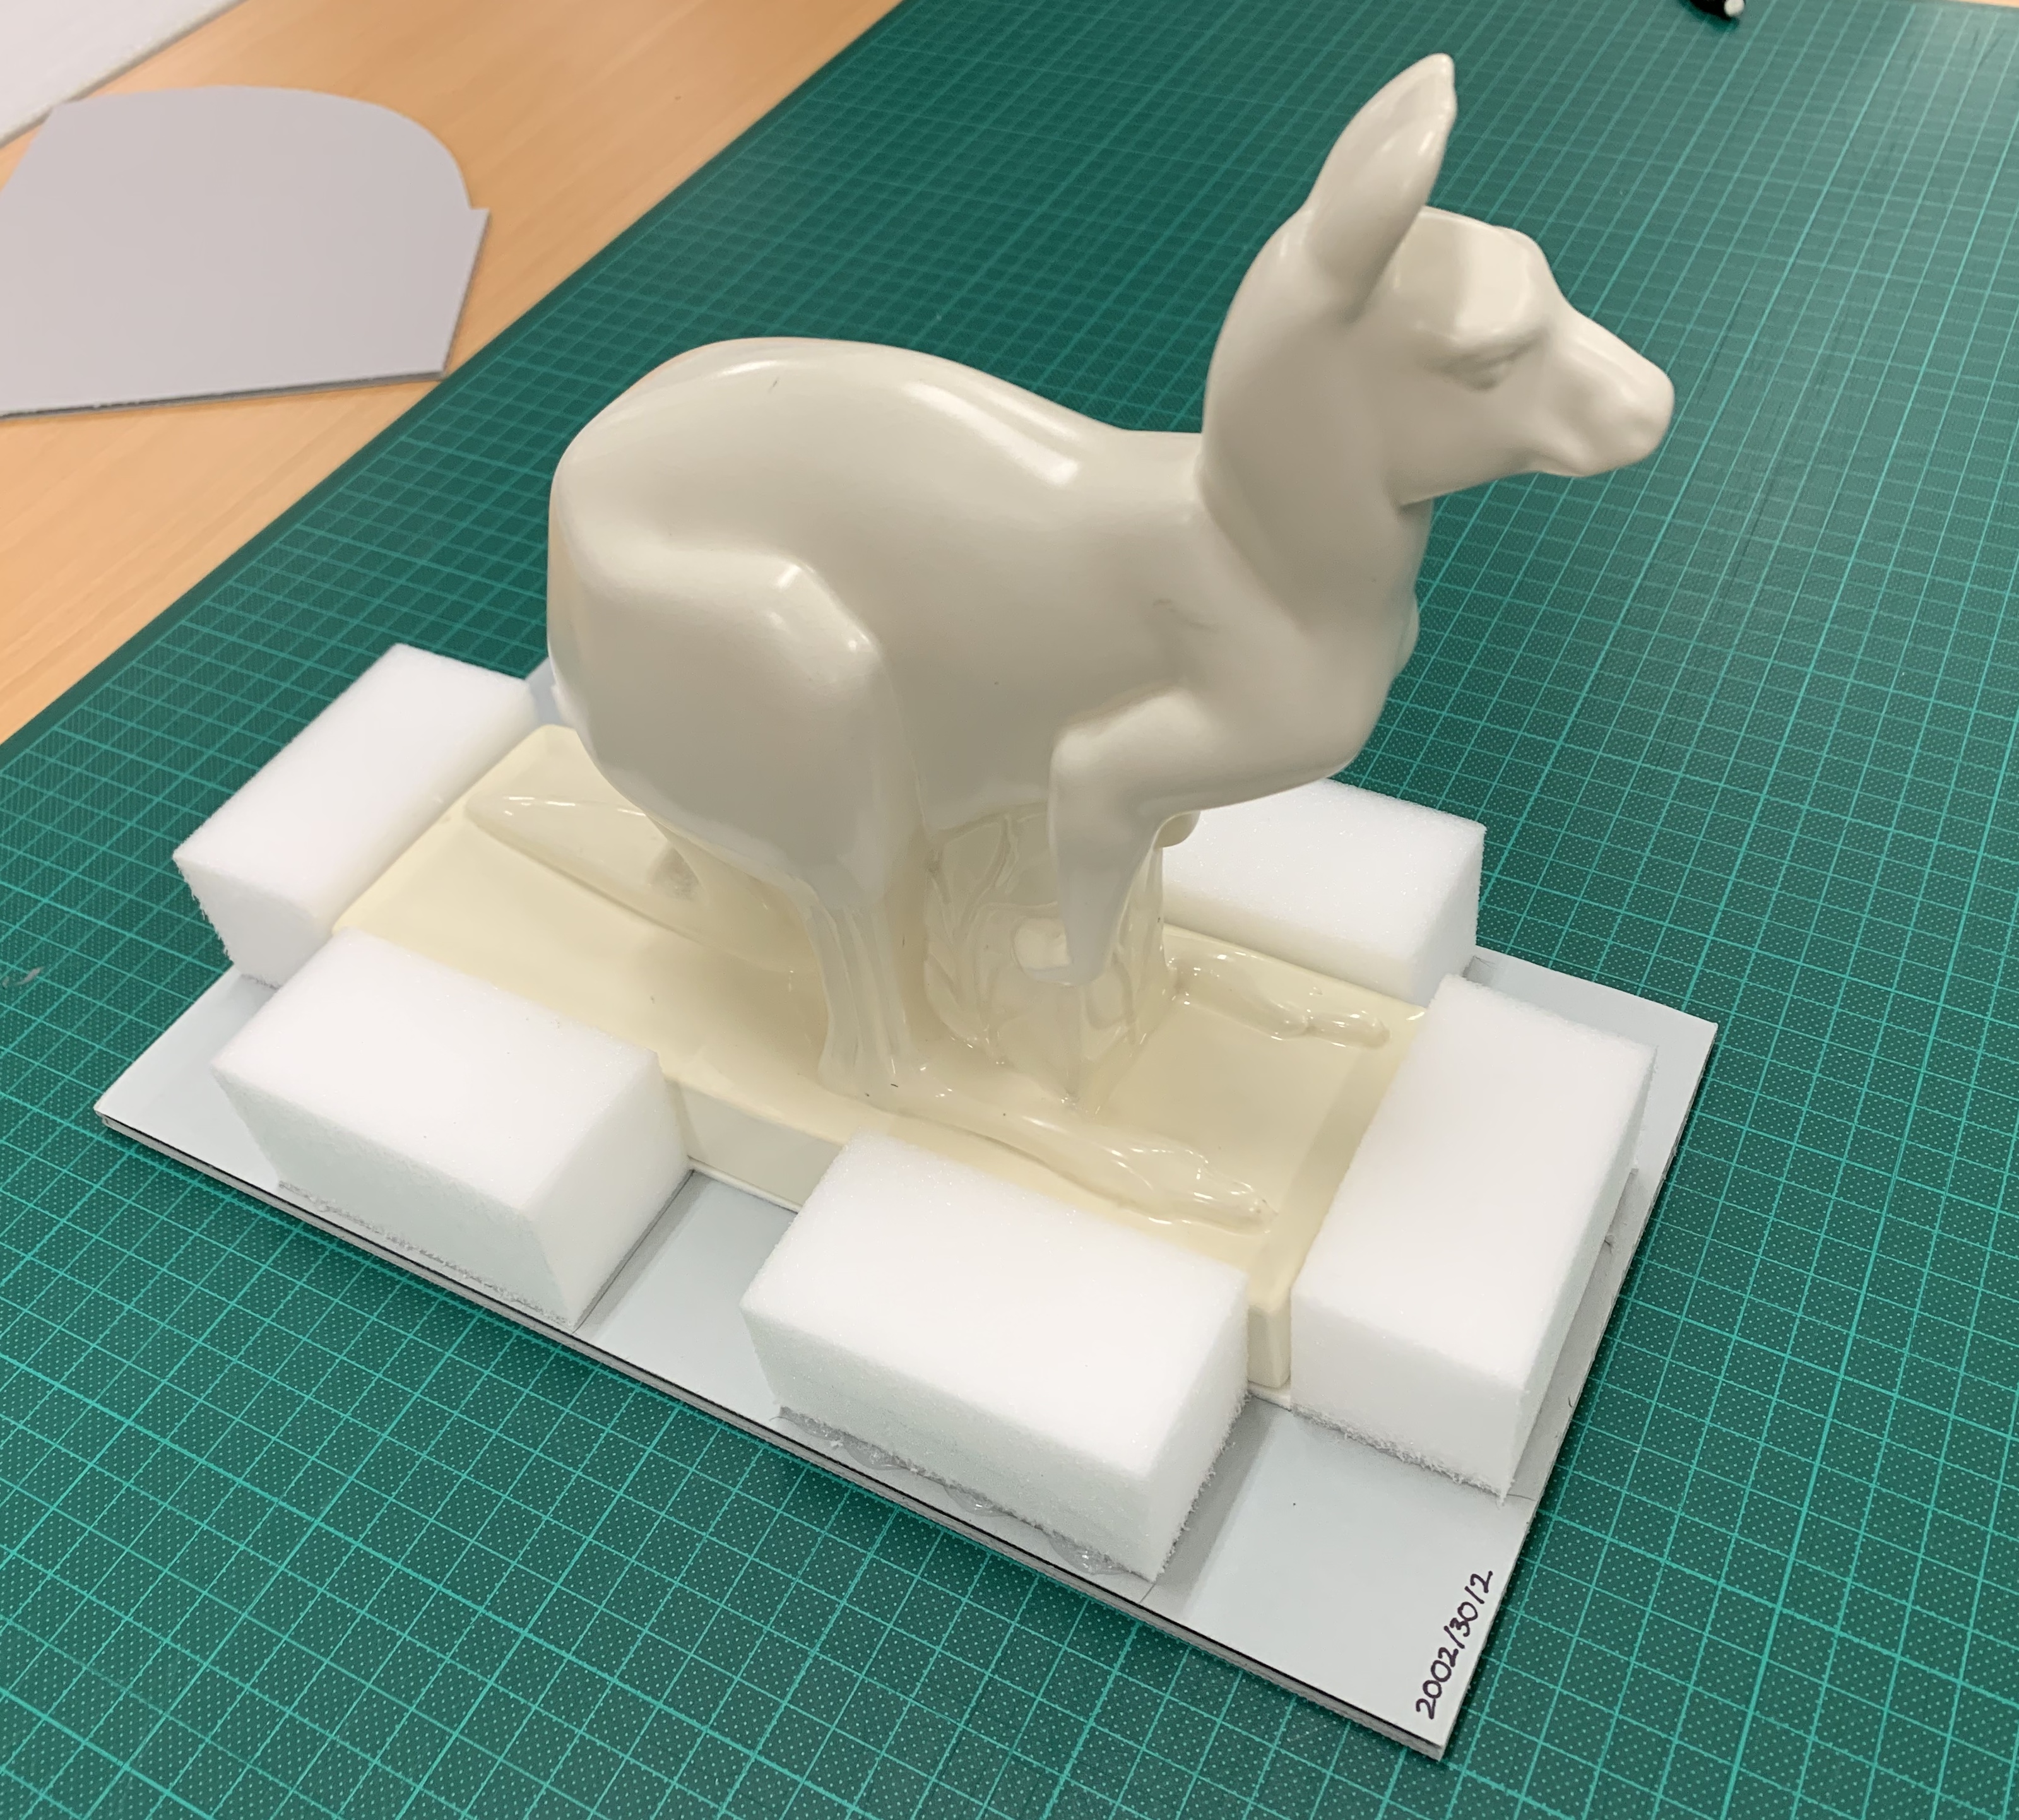 White earthenware kangaroo sitting on a stiff plastic base. The kangaroo figure itself has rectangular base around which have been glued six foam blocks – two each along the long sides of the base, and one each along the short sides.